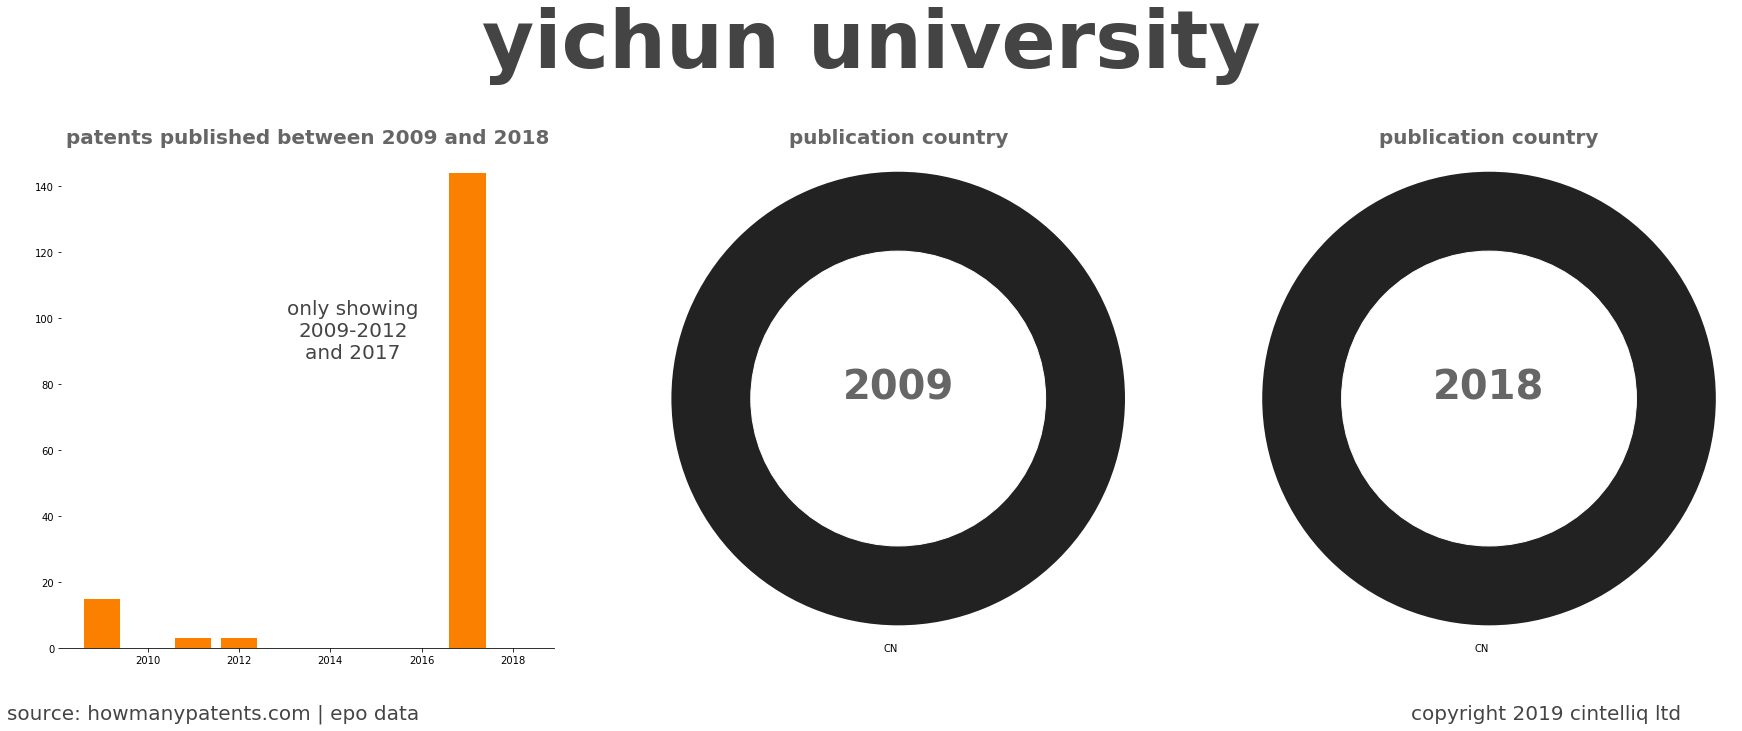 summary of patents for Yichun University